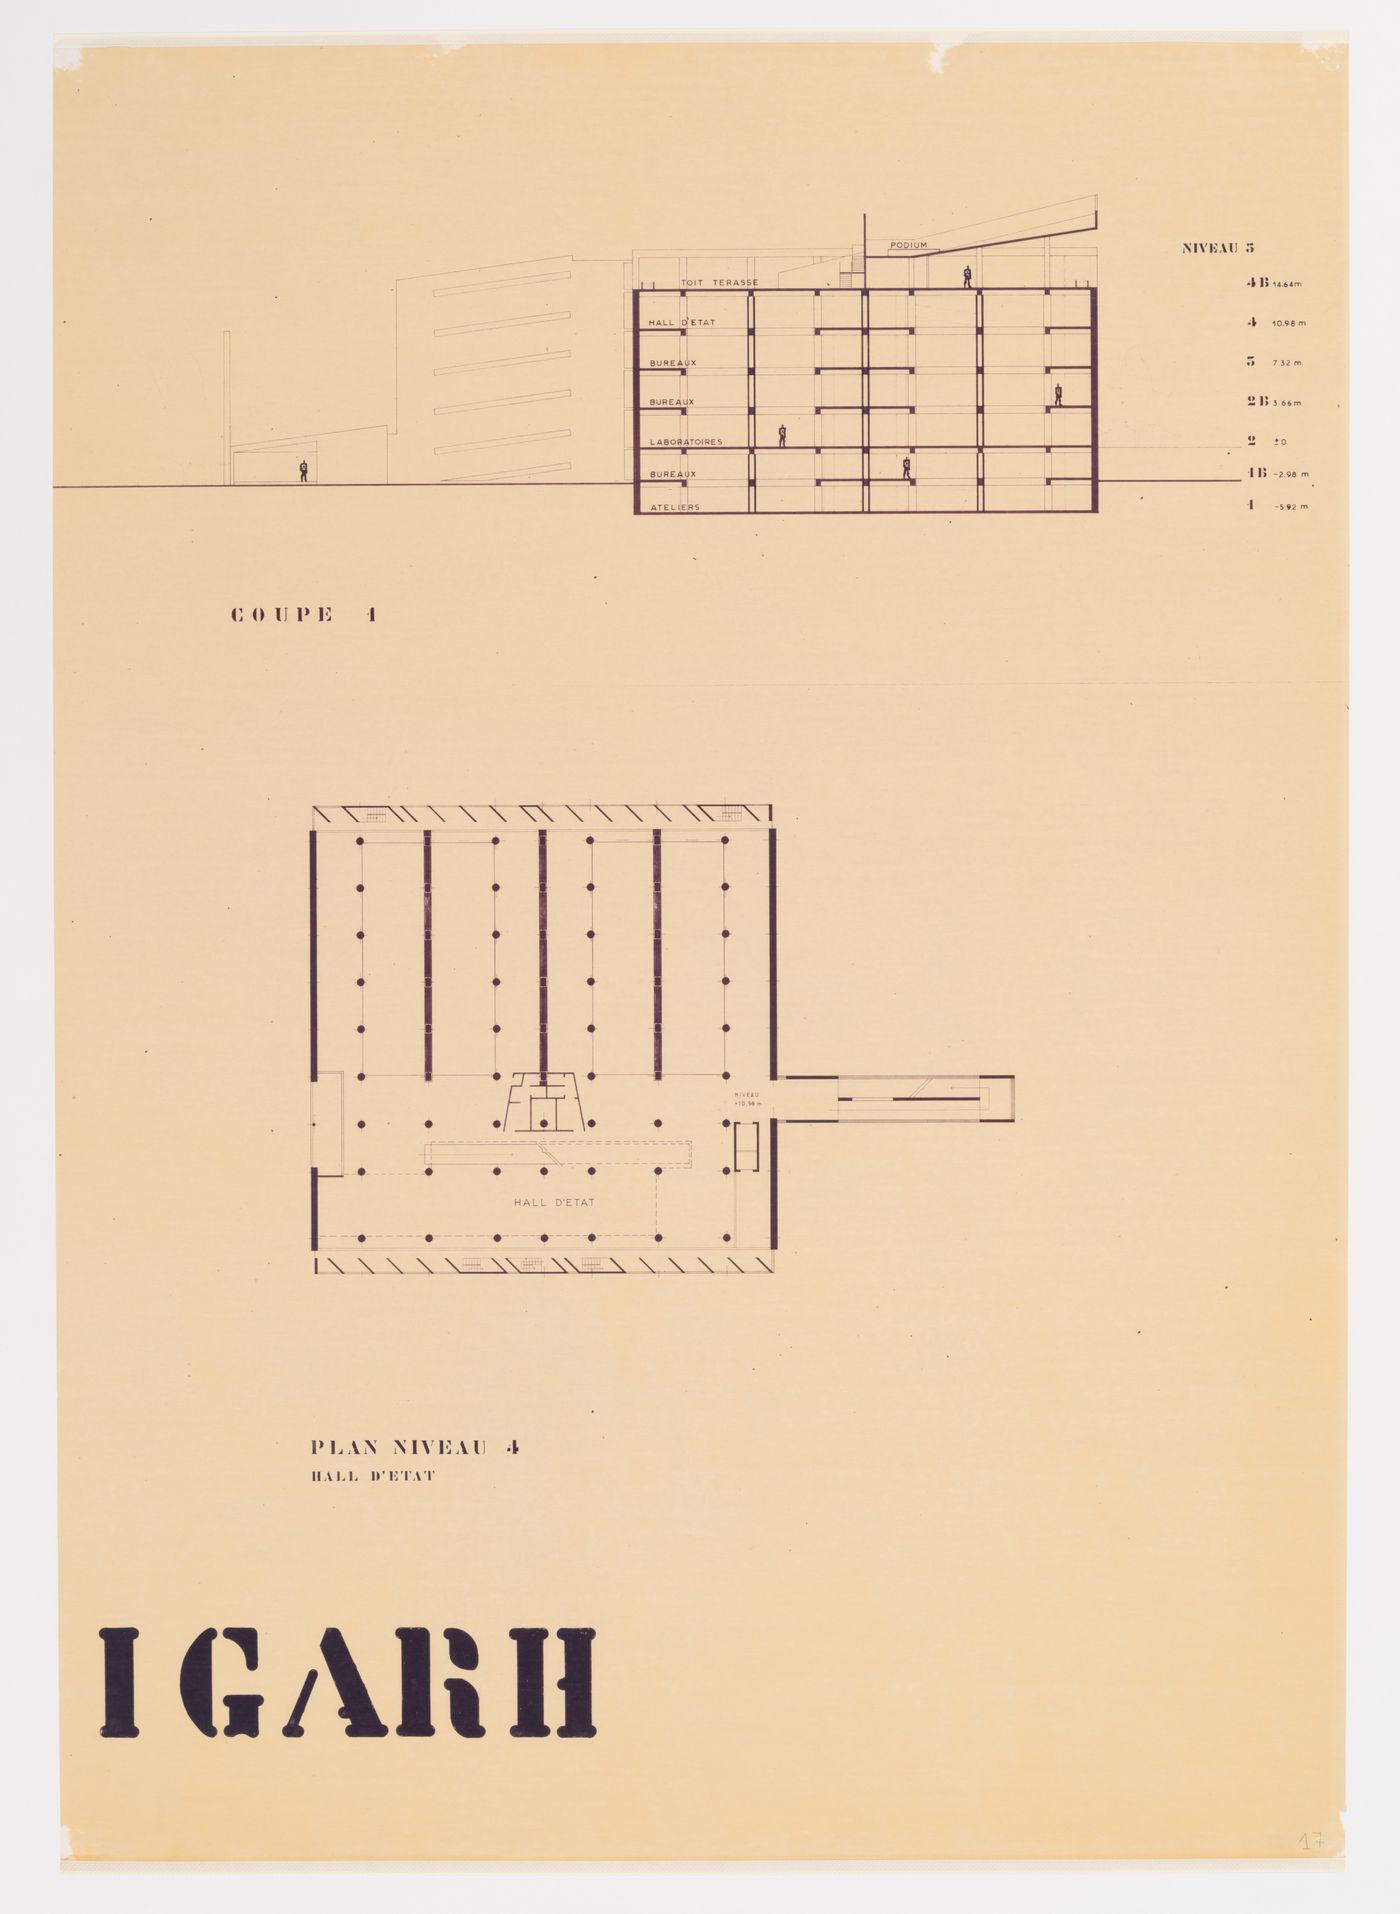 Presentation drawing for the Museum of Knowledge, Sector 1, in Chandigarh, India